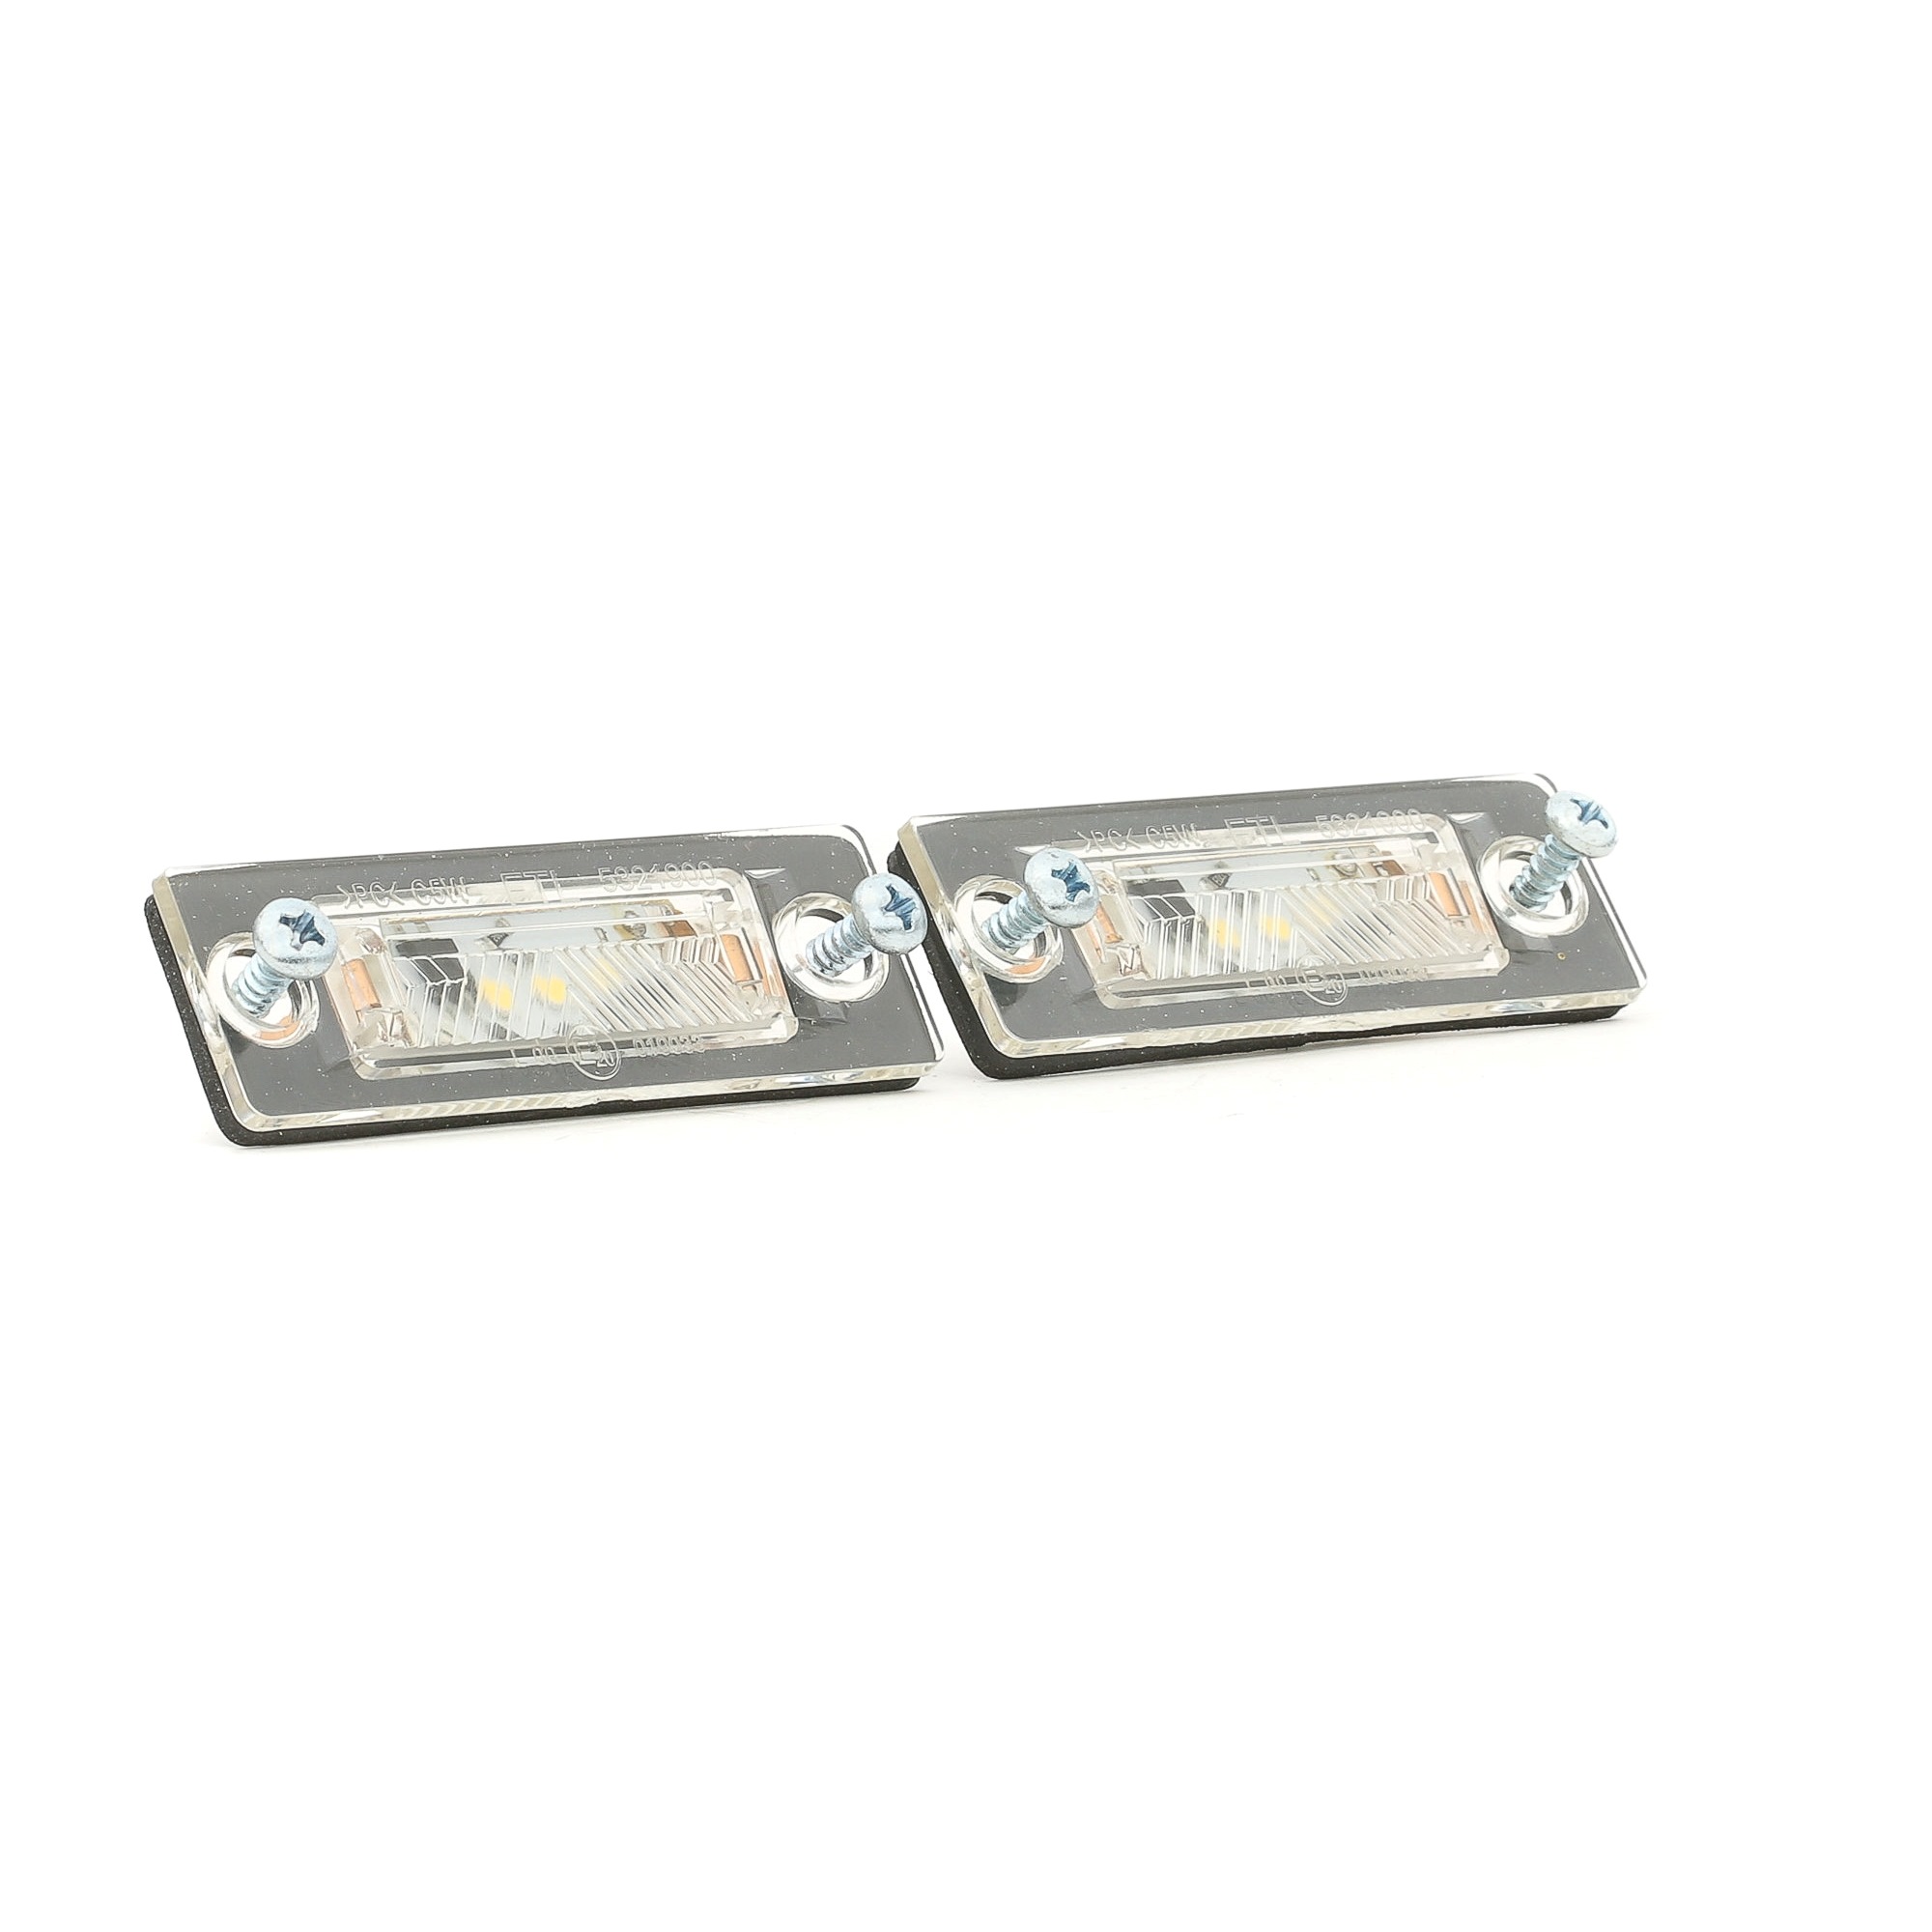 Volkswagen Licence Plate Light ABAKUS 053-21-900LED at a good price